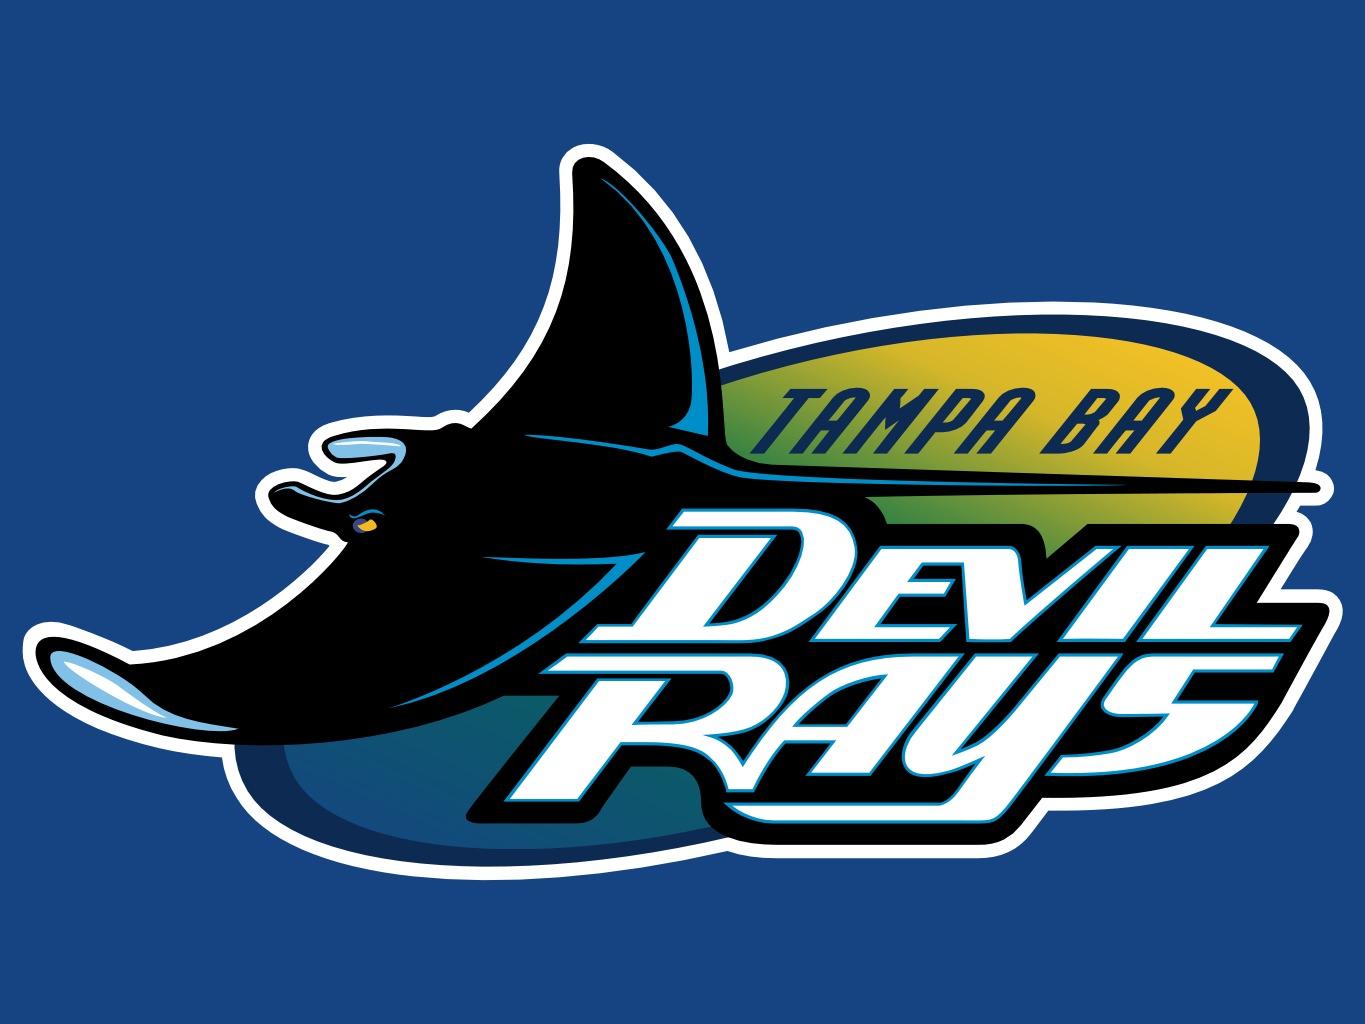 Magazine Rays To Celebrate 20th Season By Wearing Devil Rays